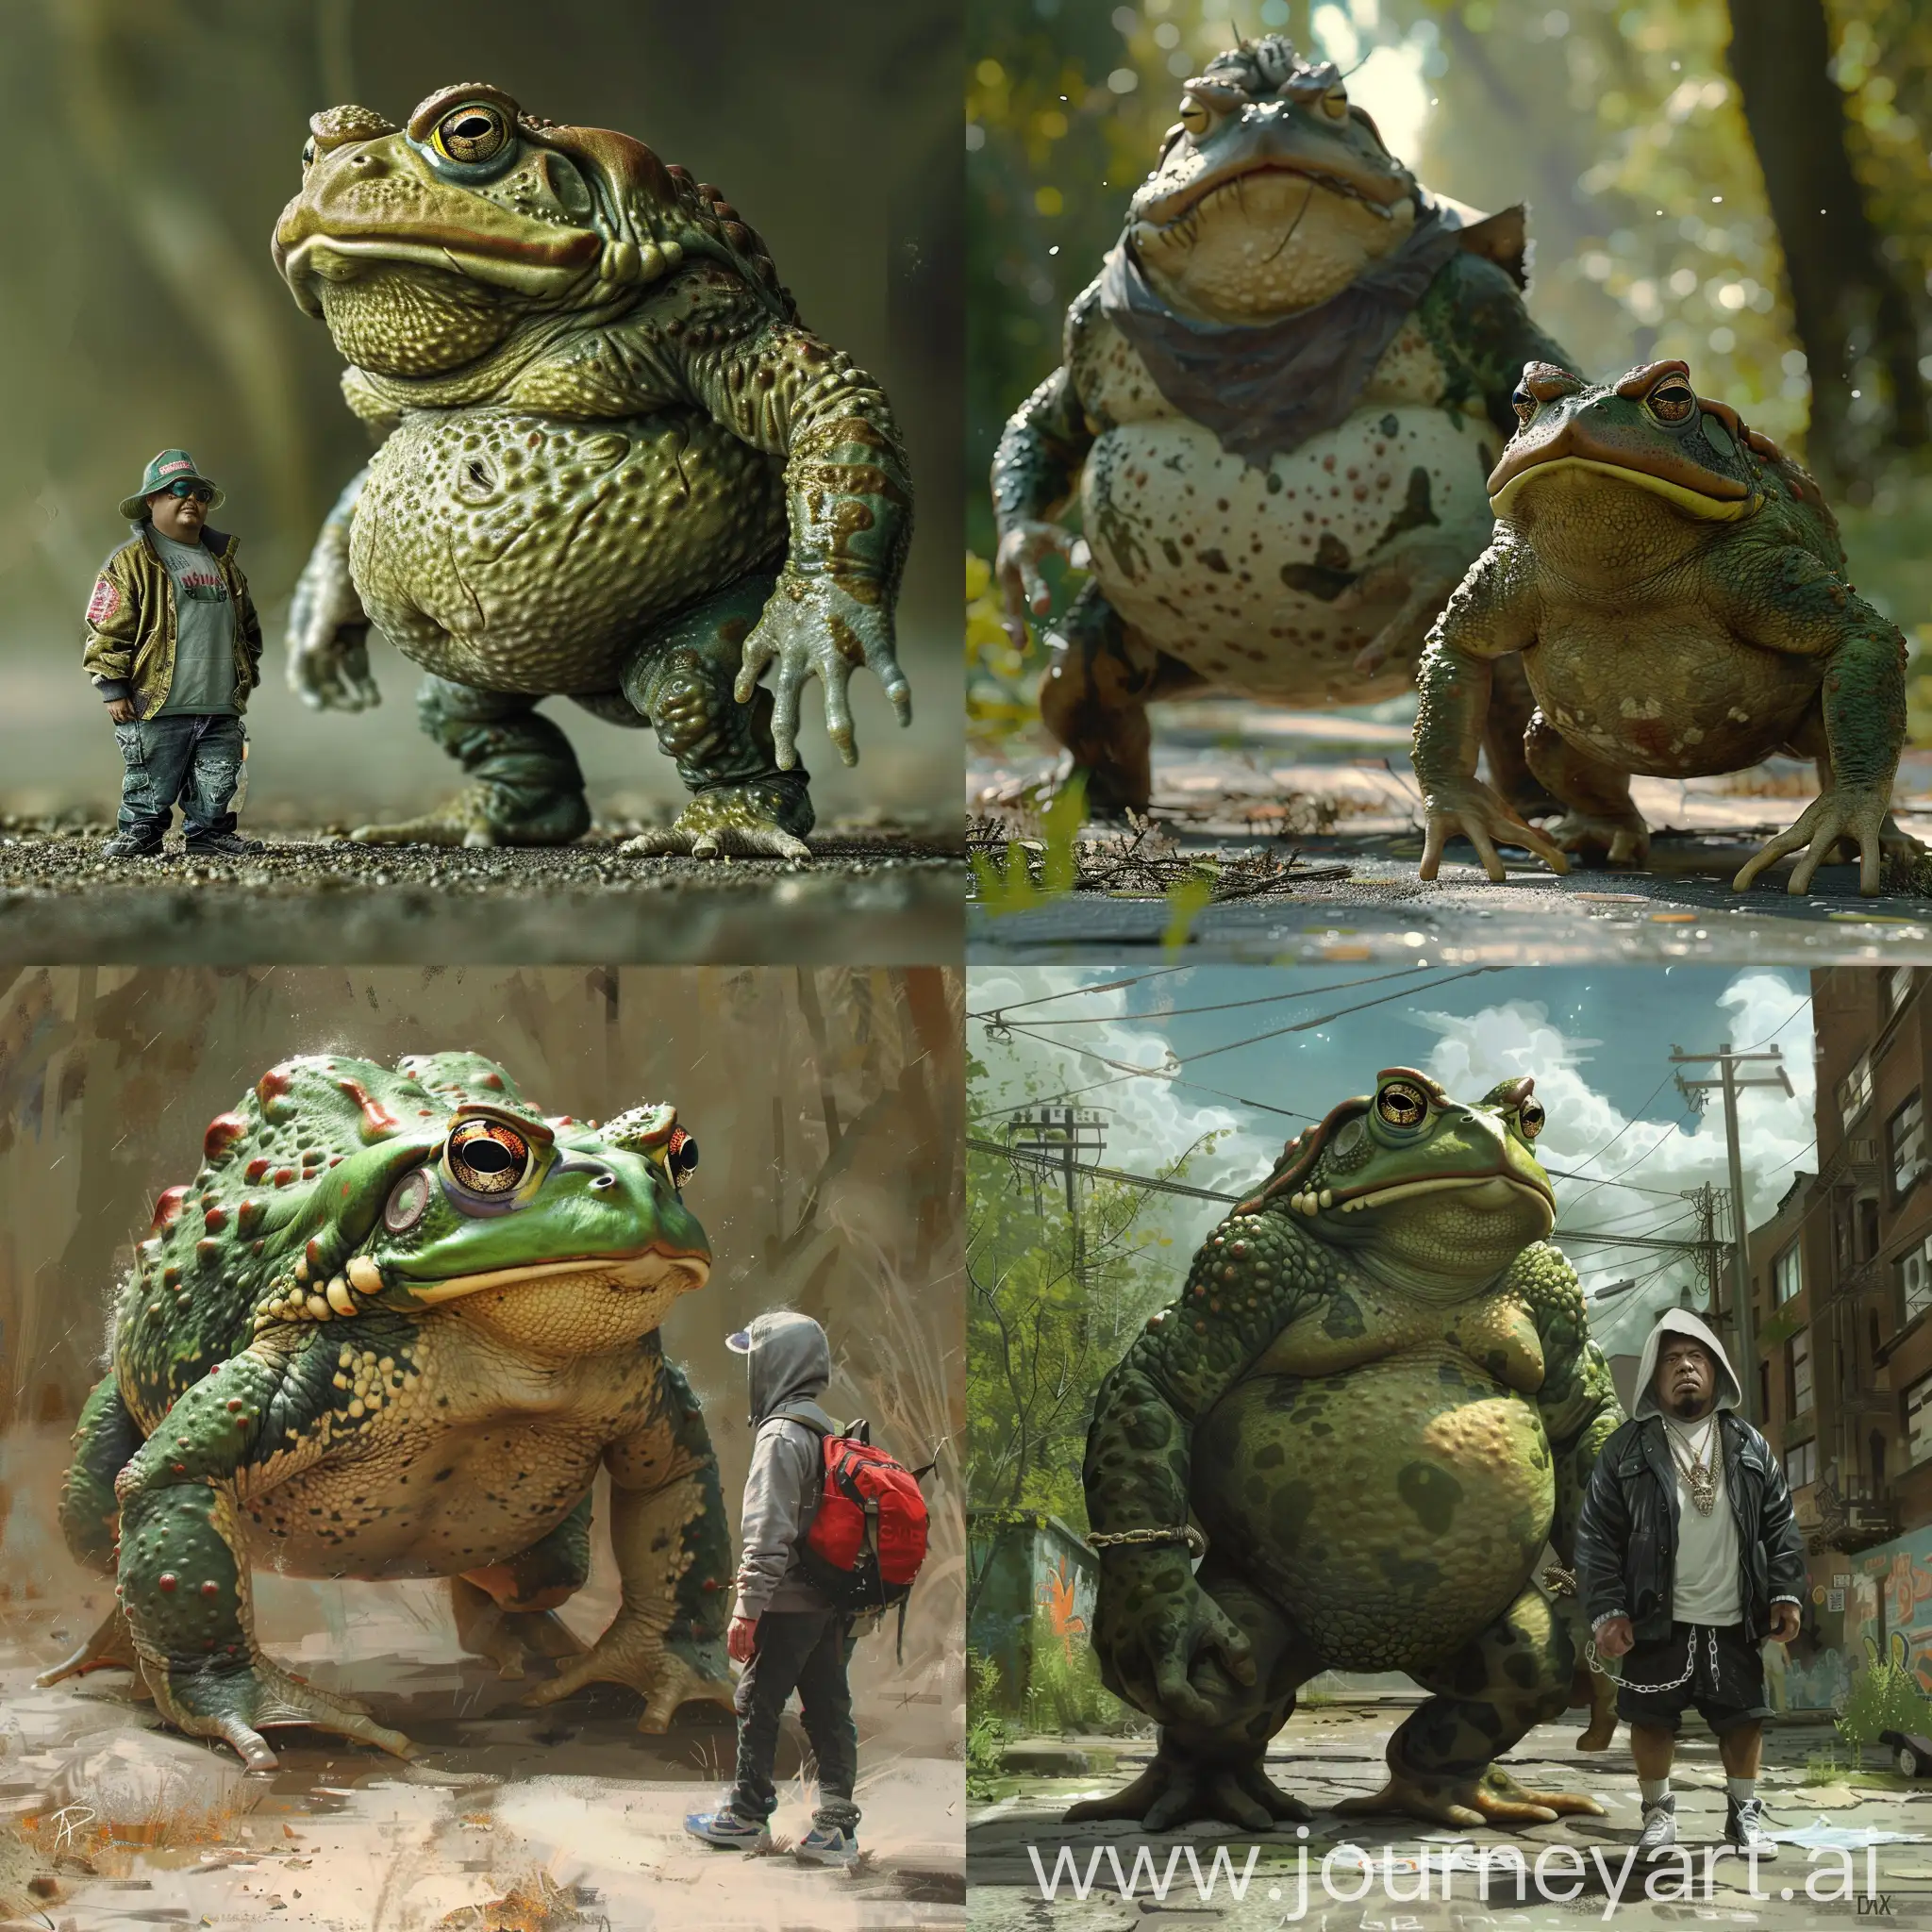 Big-Green-Toad-Walking-with-His-Friend-Max-in-EminemLike-Style